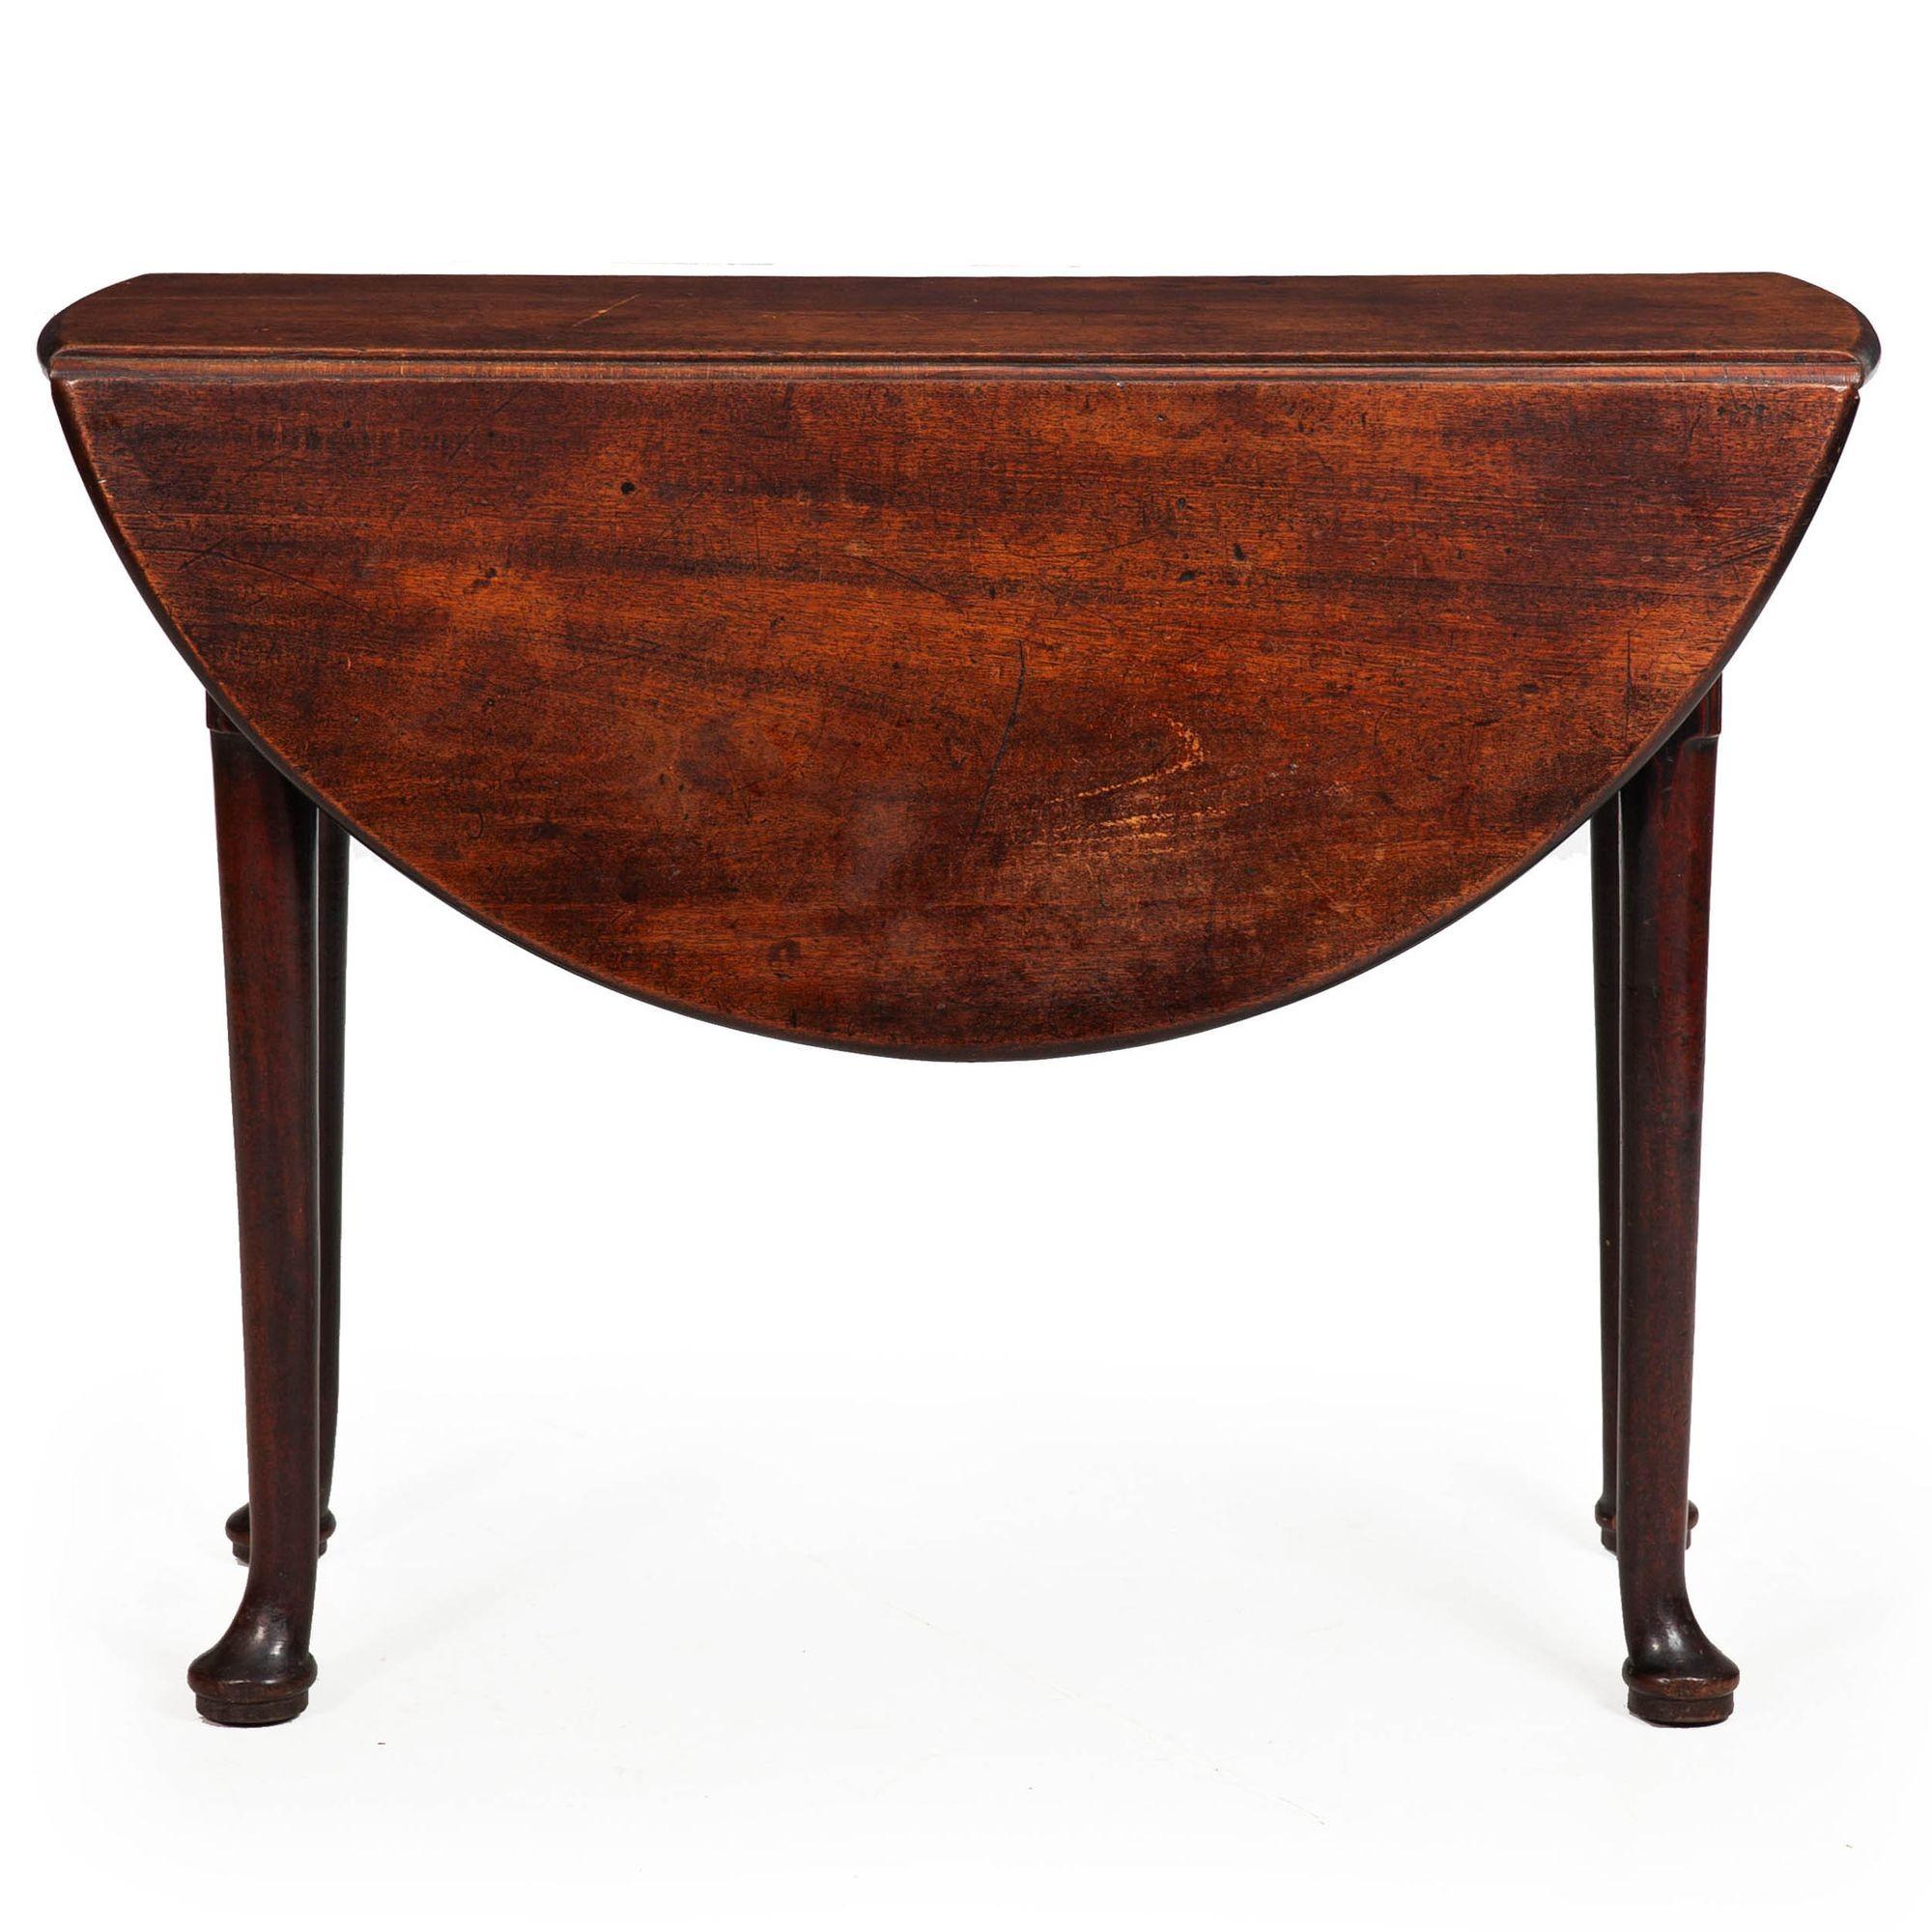 GEORGE II WALNUT DROP-LEAF TABLE
England, ca. 1750
Item # 402GKT08P

The rich patina was the first thing that caught our attention with this table - the very old historic surface is so nuanced and lovely with centuries of wear preserved in the dense